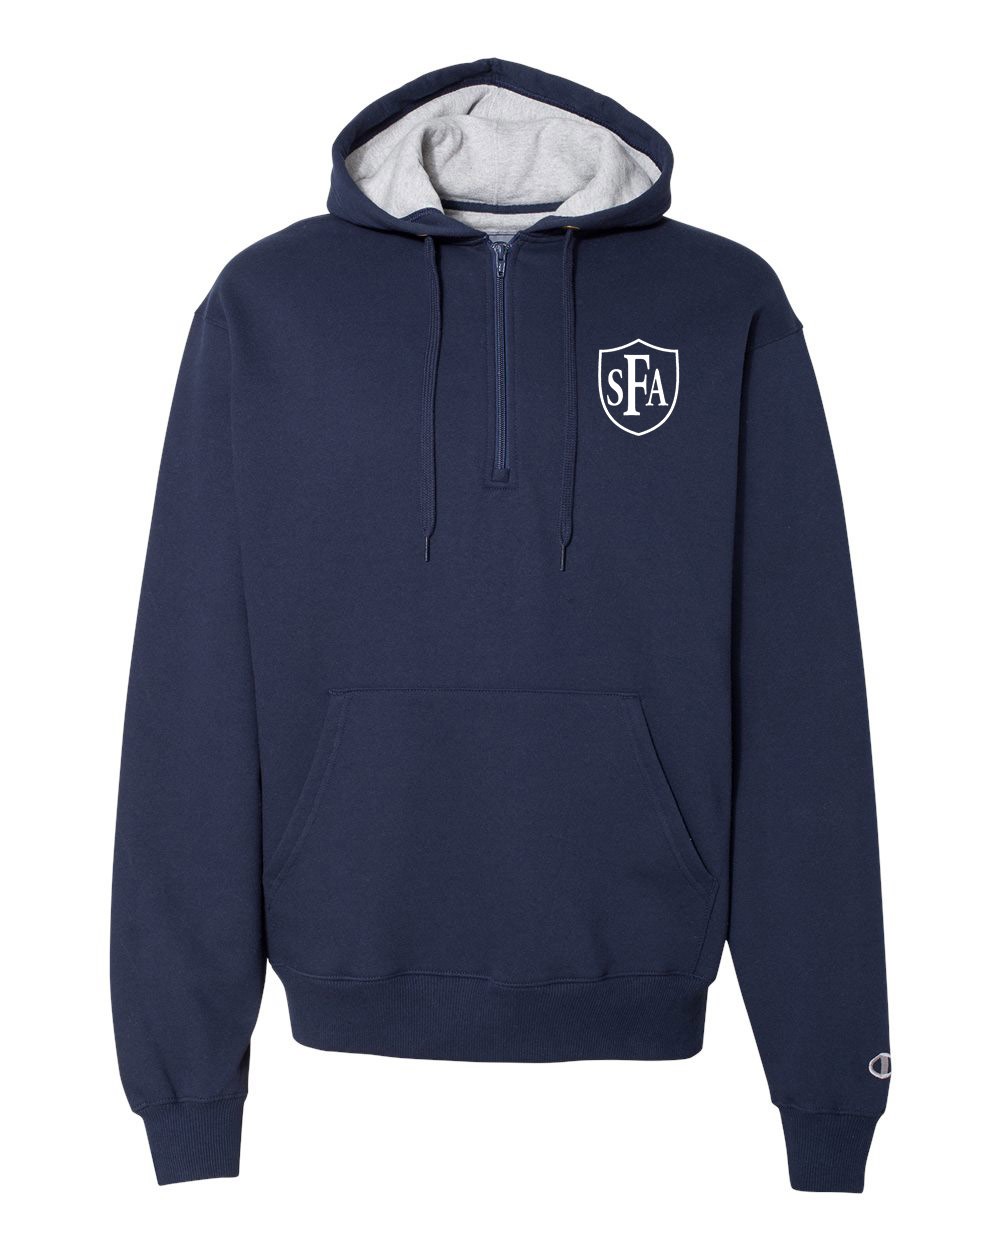 SFA Spirit Champion Hooded Quarter Zip w/Logo - Please Allow 2-3 Weeks For Delivery 